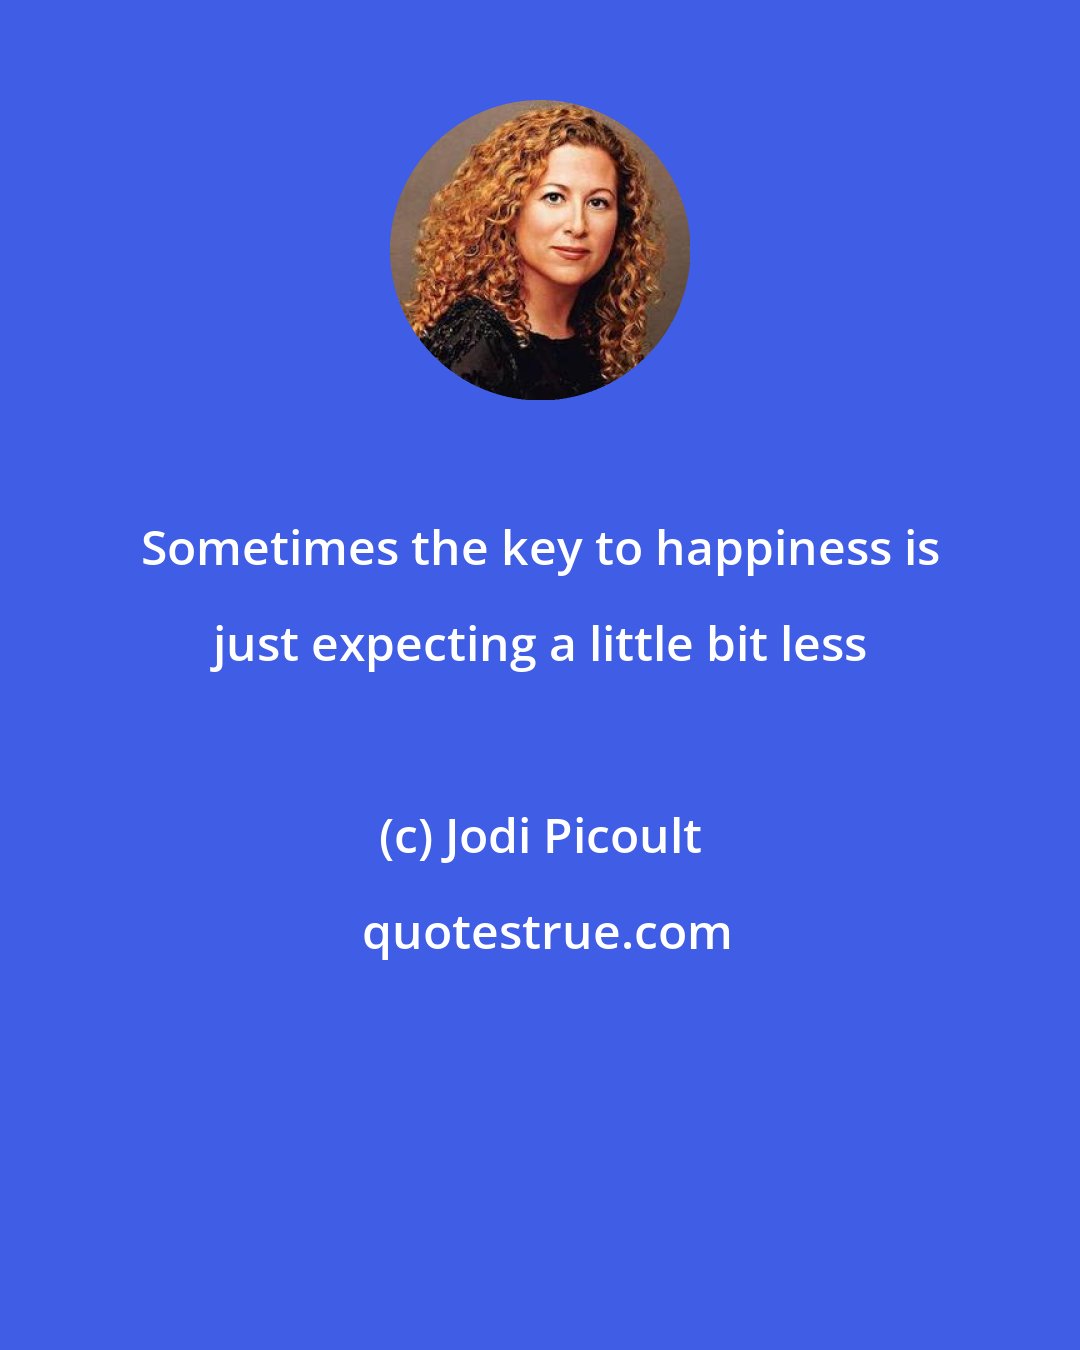 Jodi Picoult: Sometimes the key to happiness is just expecting a little bit less